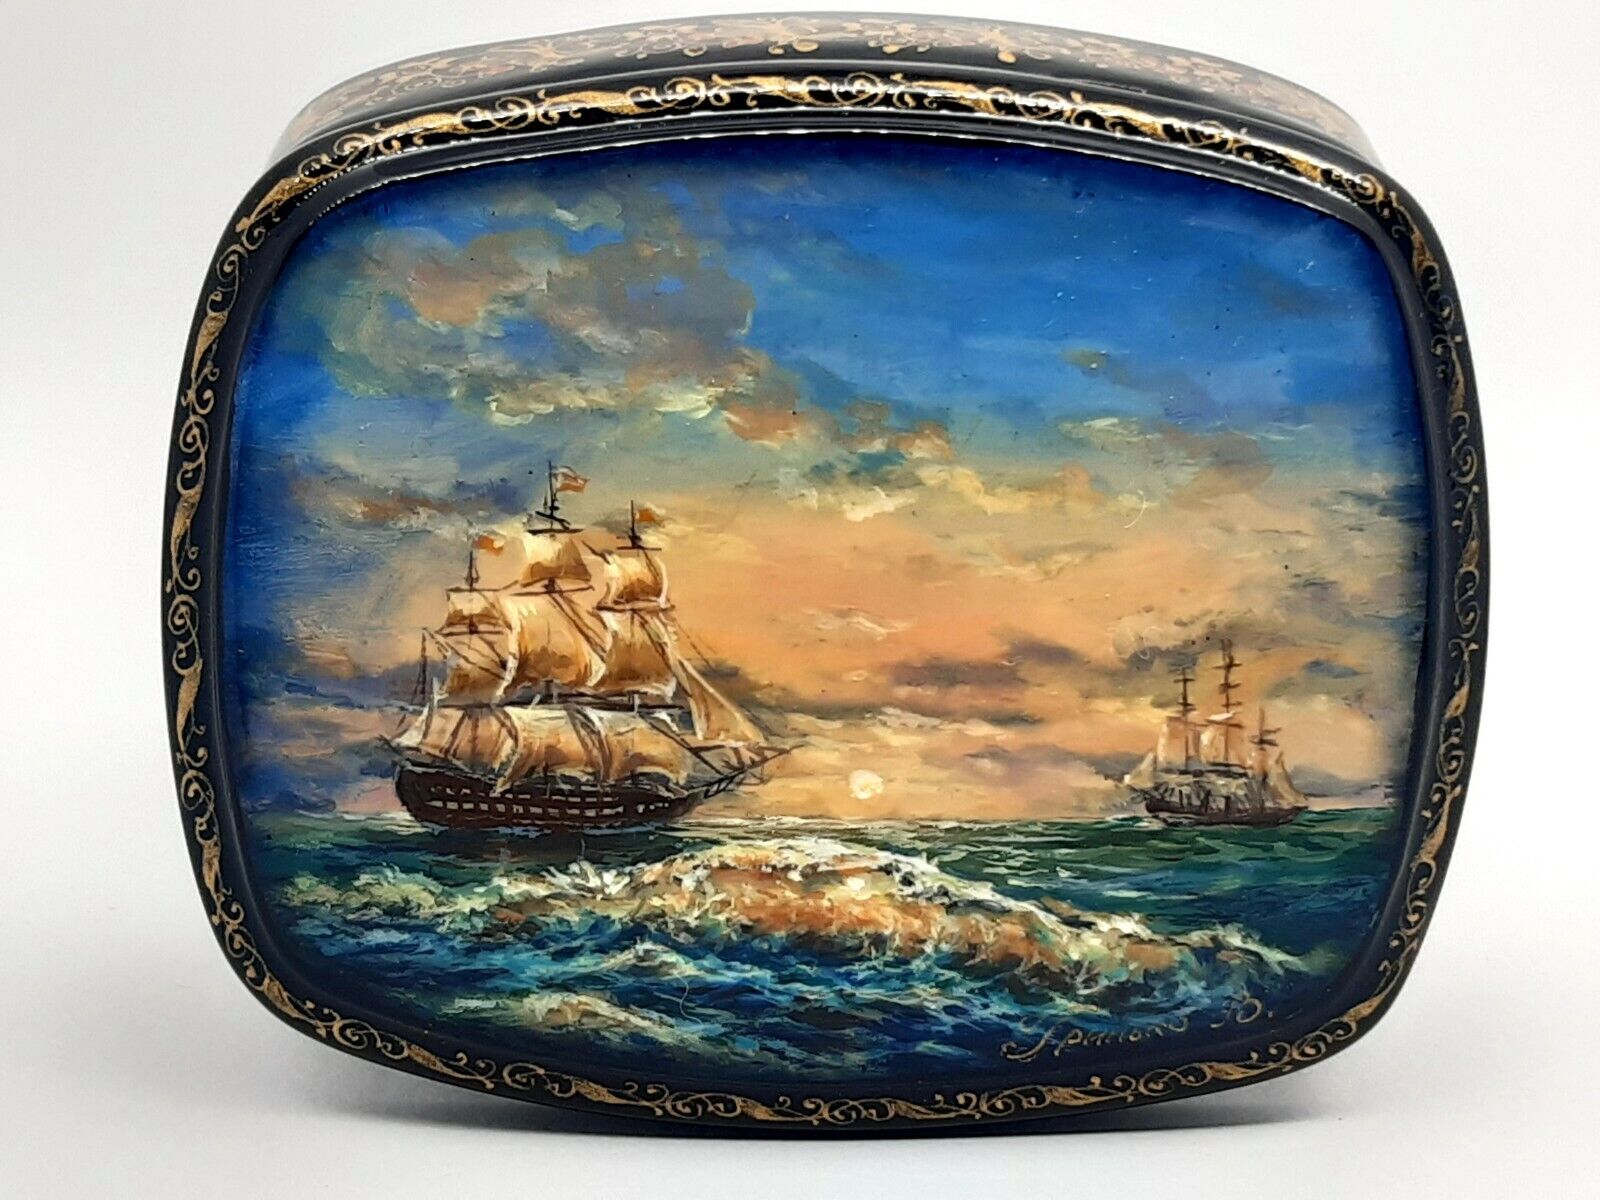 Seascape Ukrainian lacquer box “Ships and sea” by Grinko Hand made in Ukraine